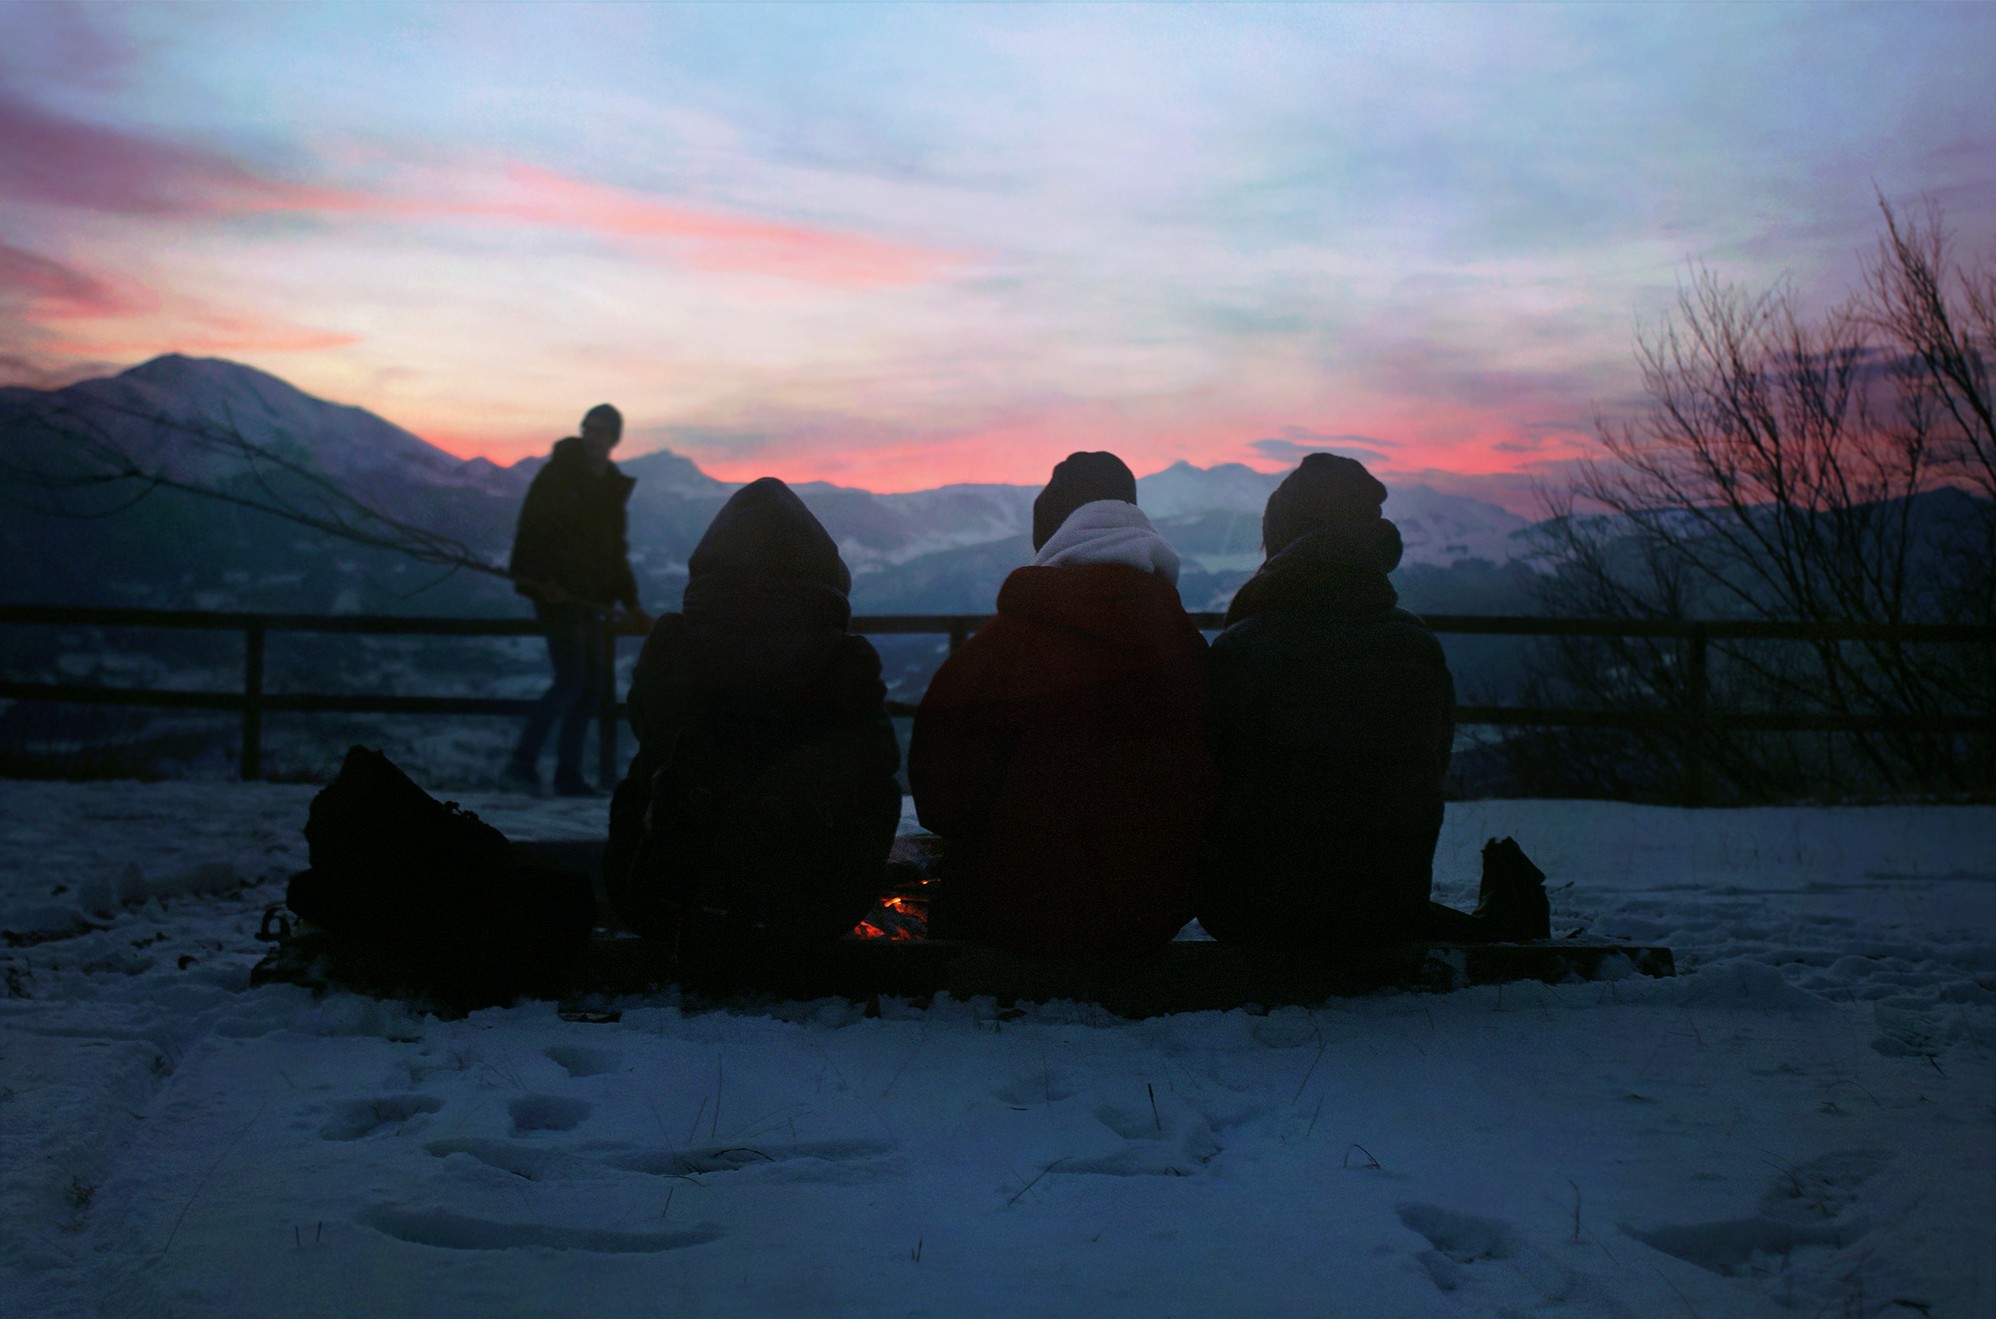 People 1996x1319 group of people social gathering rear view dark sky mountains landscape outdoors sitting low light